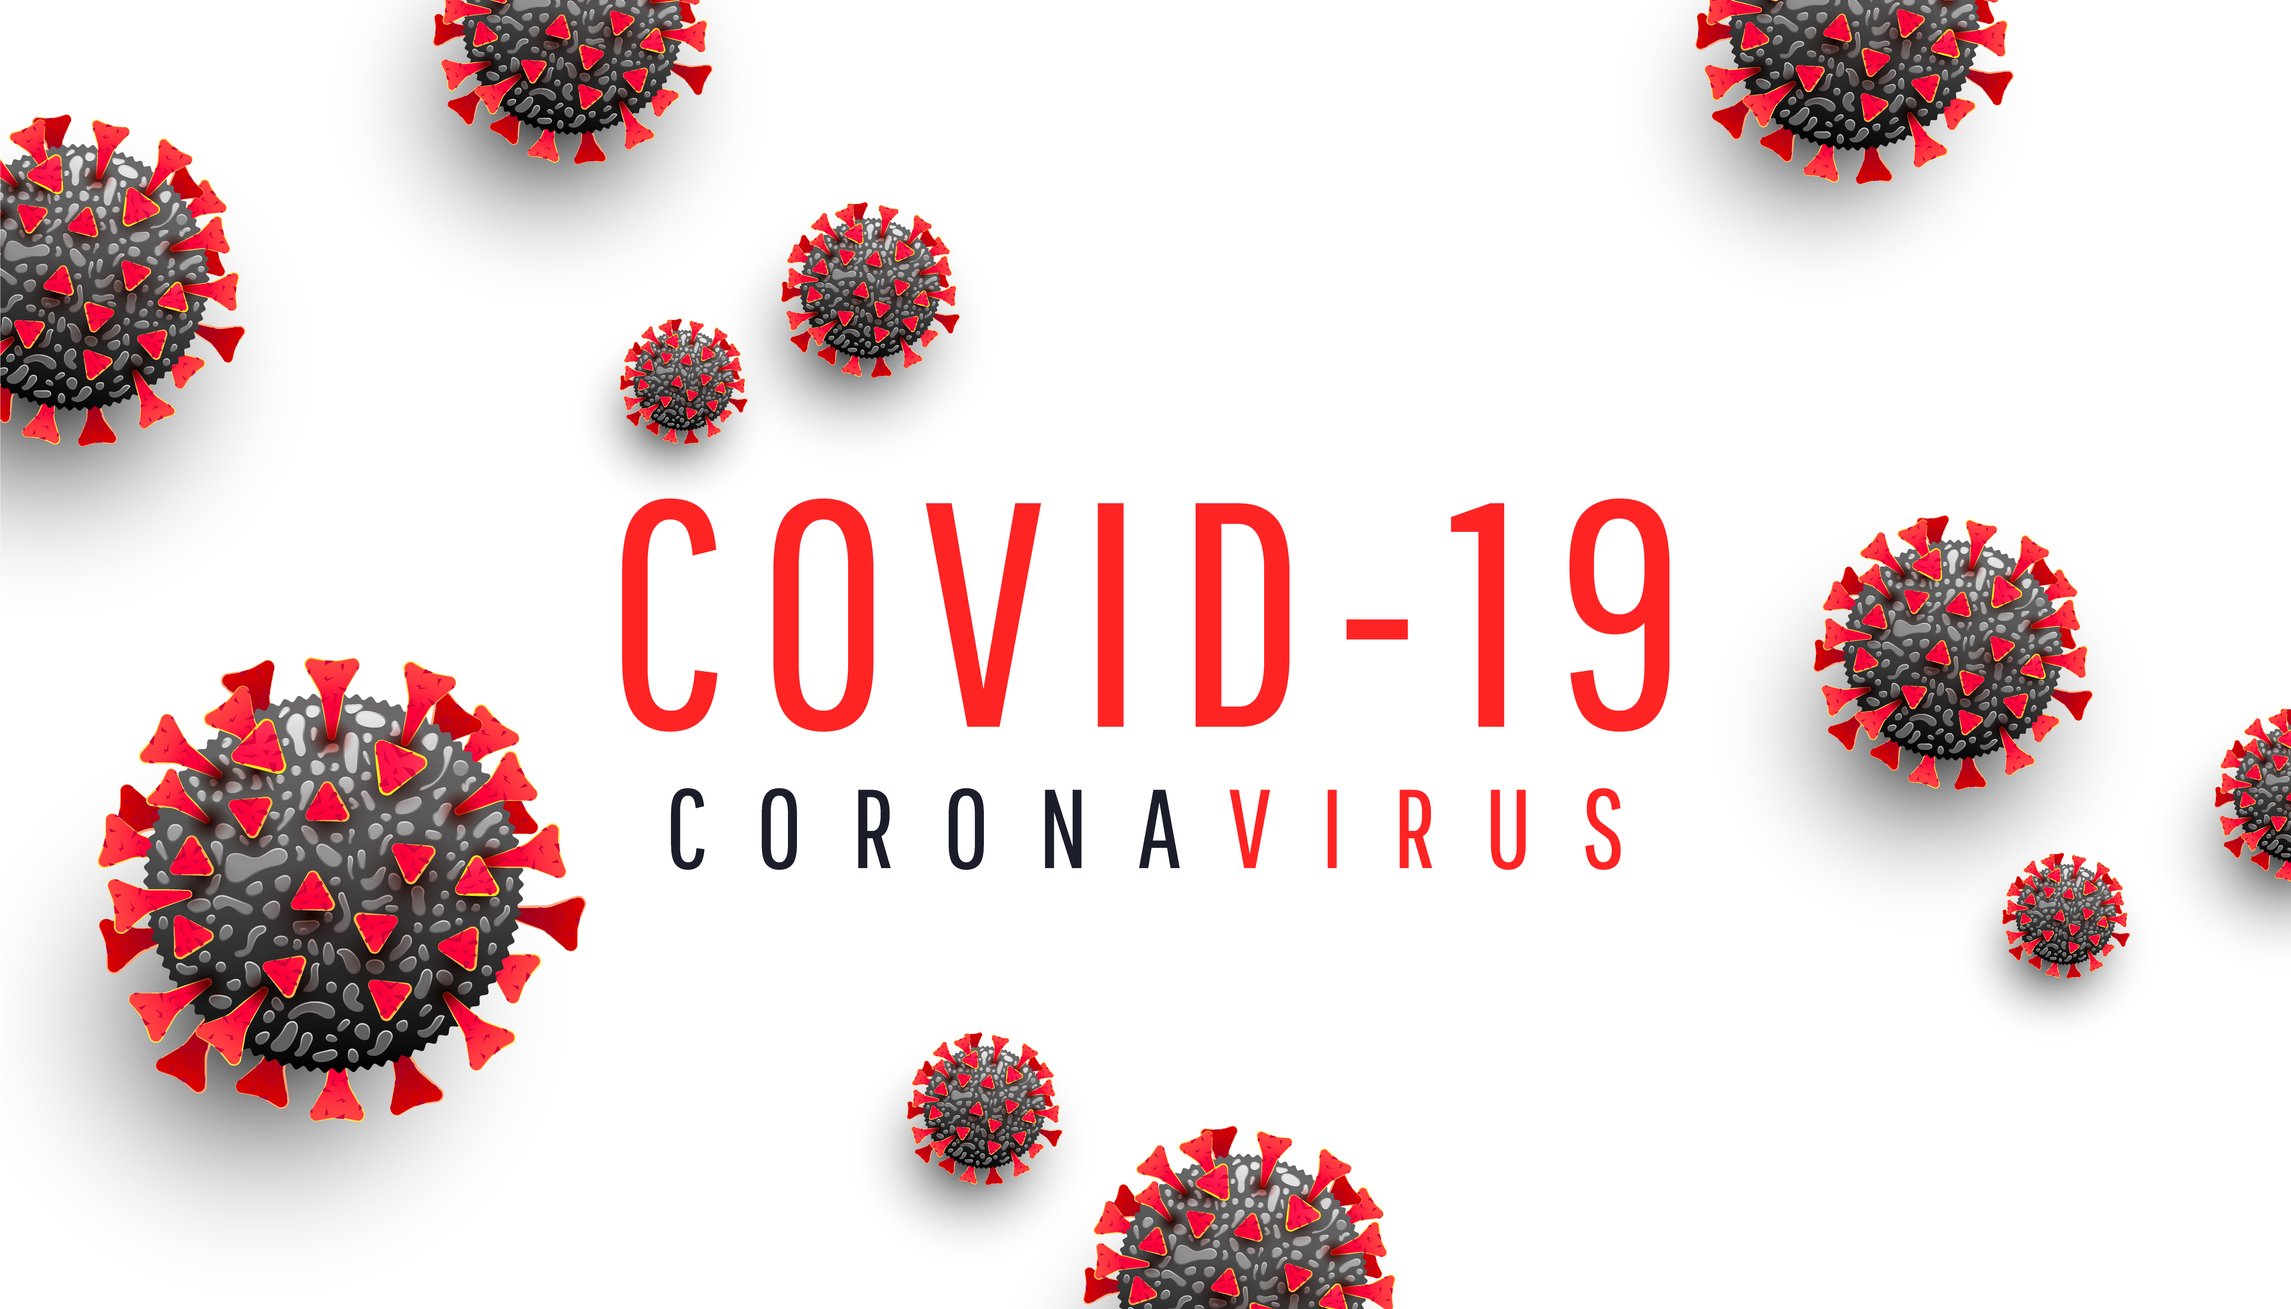 Horizontal vector illustration of Coronavirus disease COVID-19 medical web banner with SARS-CoV-2 virus molecule and text on a white background. World pandemic 2020 | Photo: Getty Images